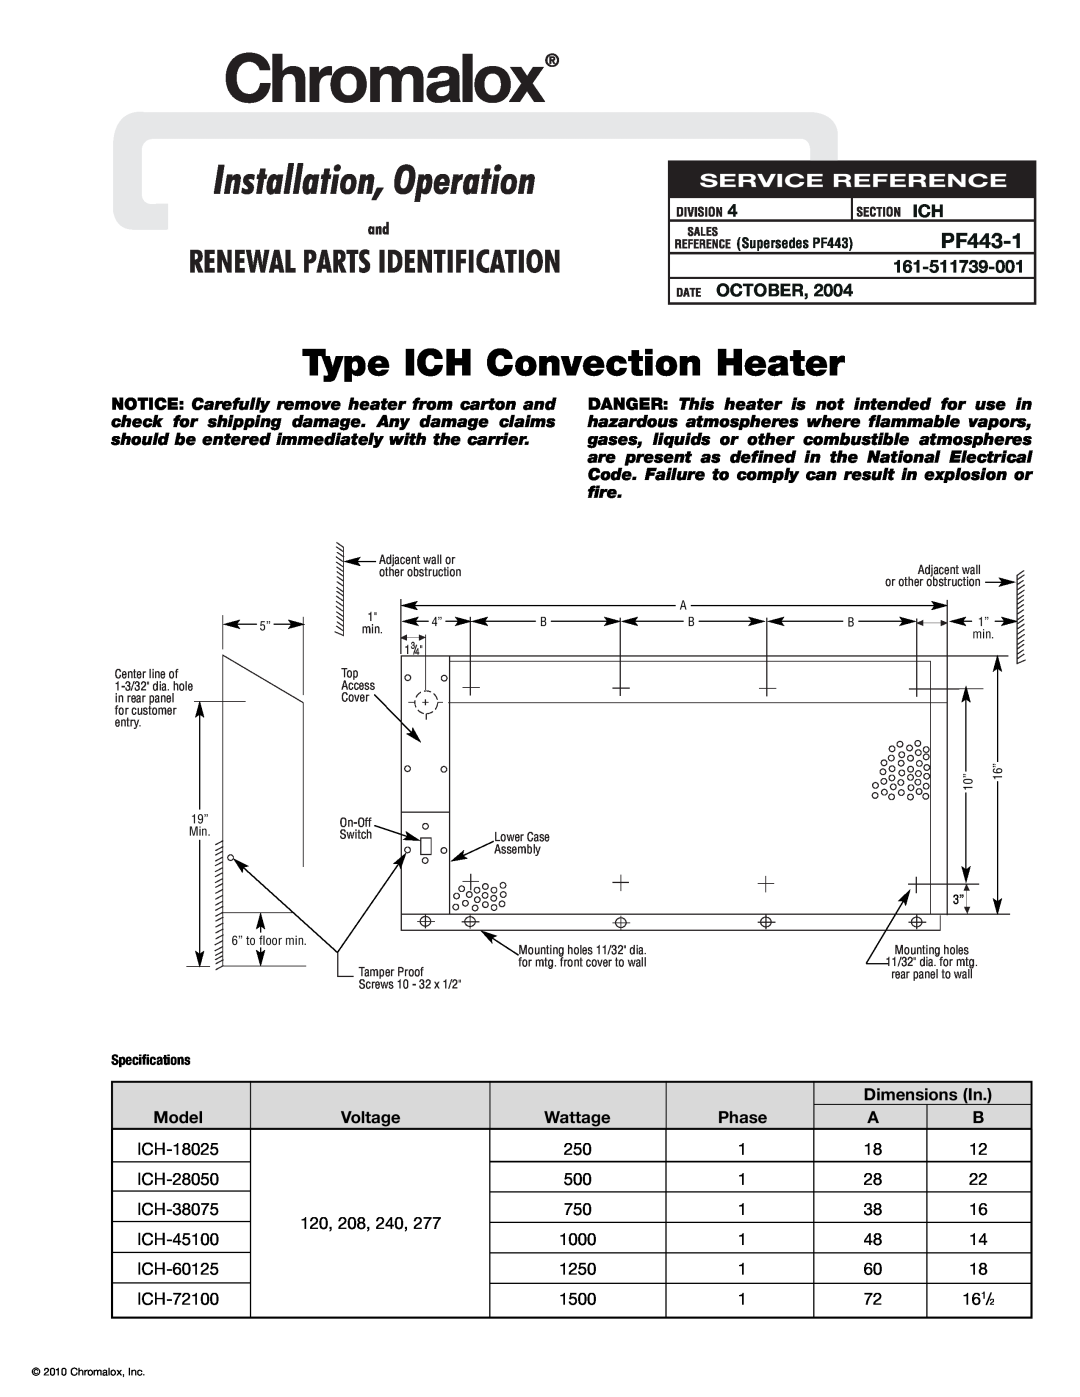 Chromalox ICH-72100, ICH-60125 specifications PF443-1, October, Dimensions In, Wattage, Type ICH Convection Heater 